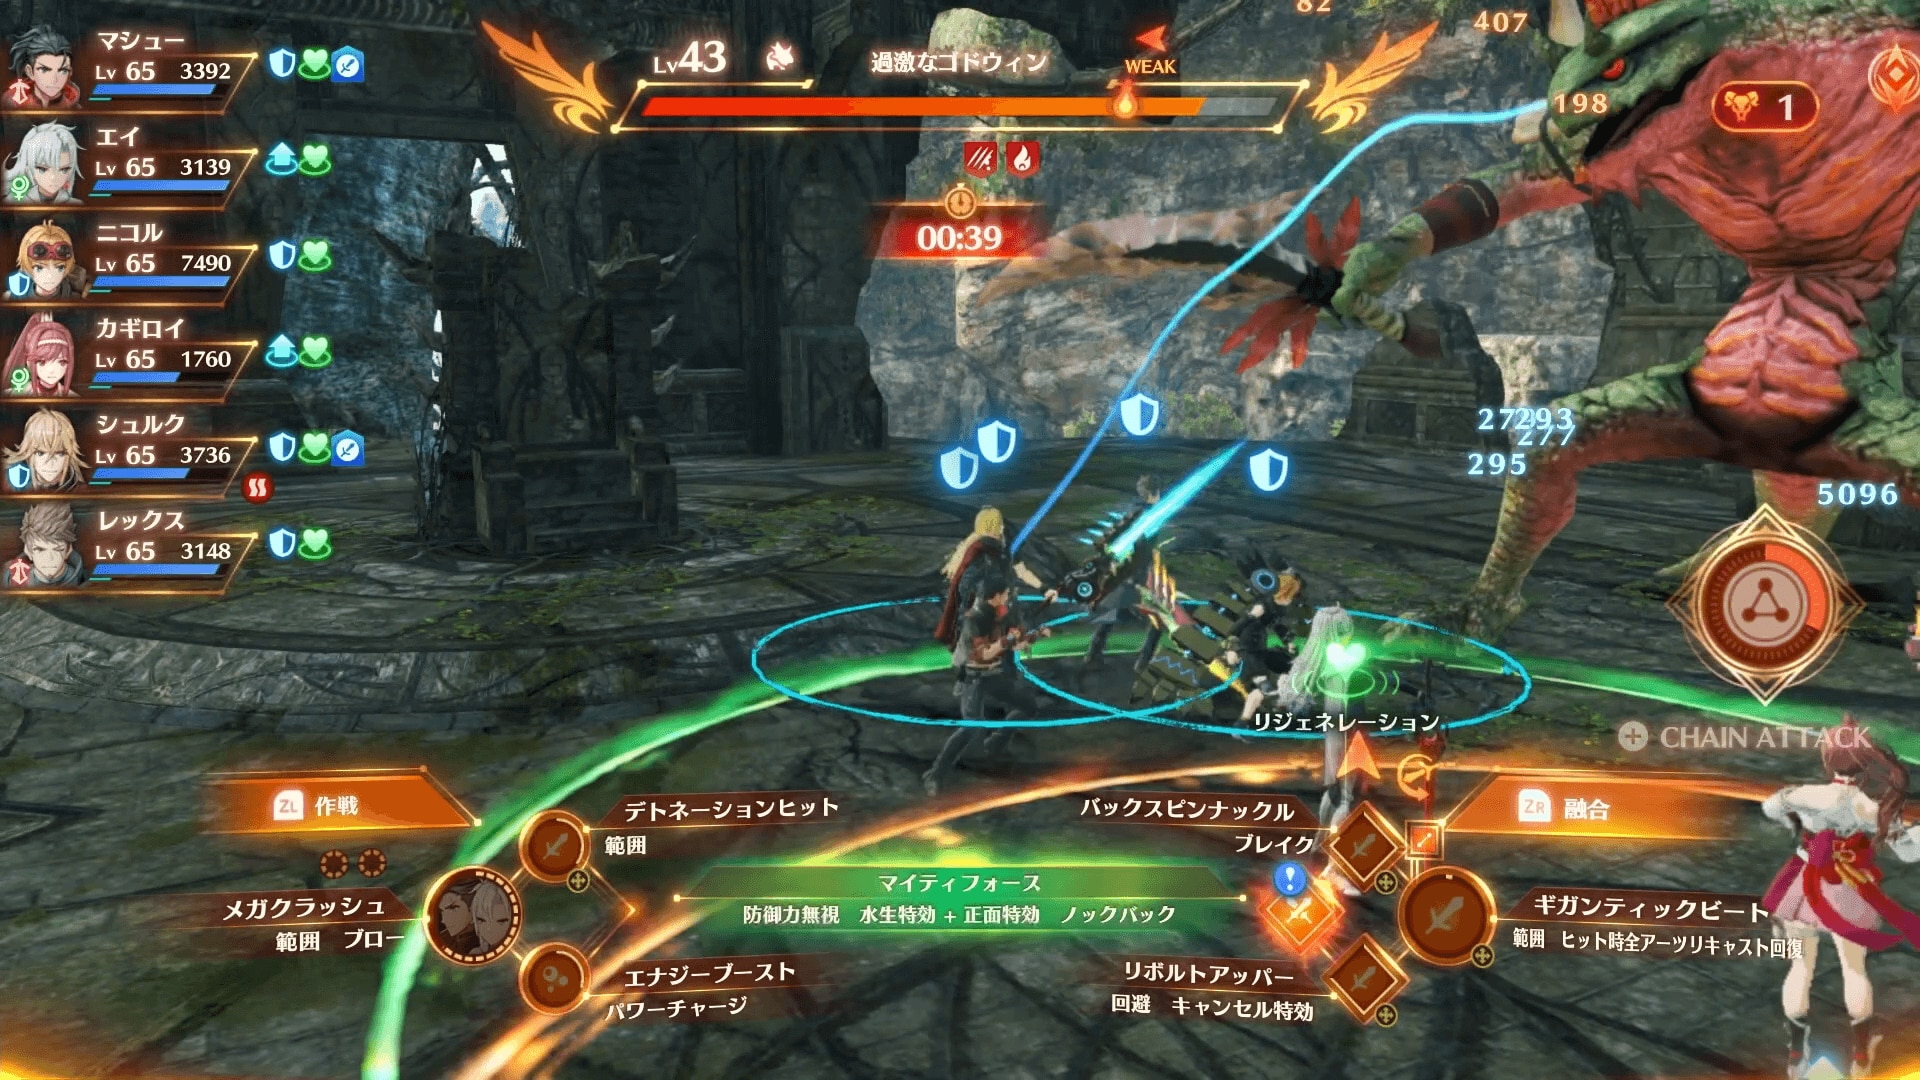 Xenoblade Chronicles 3 new gameplay from Japan Expo 2022